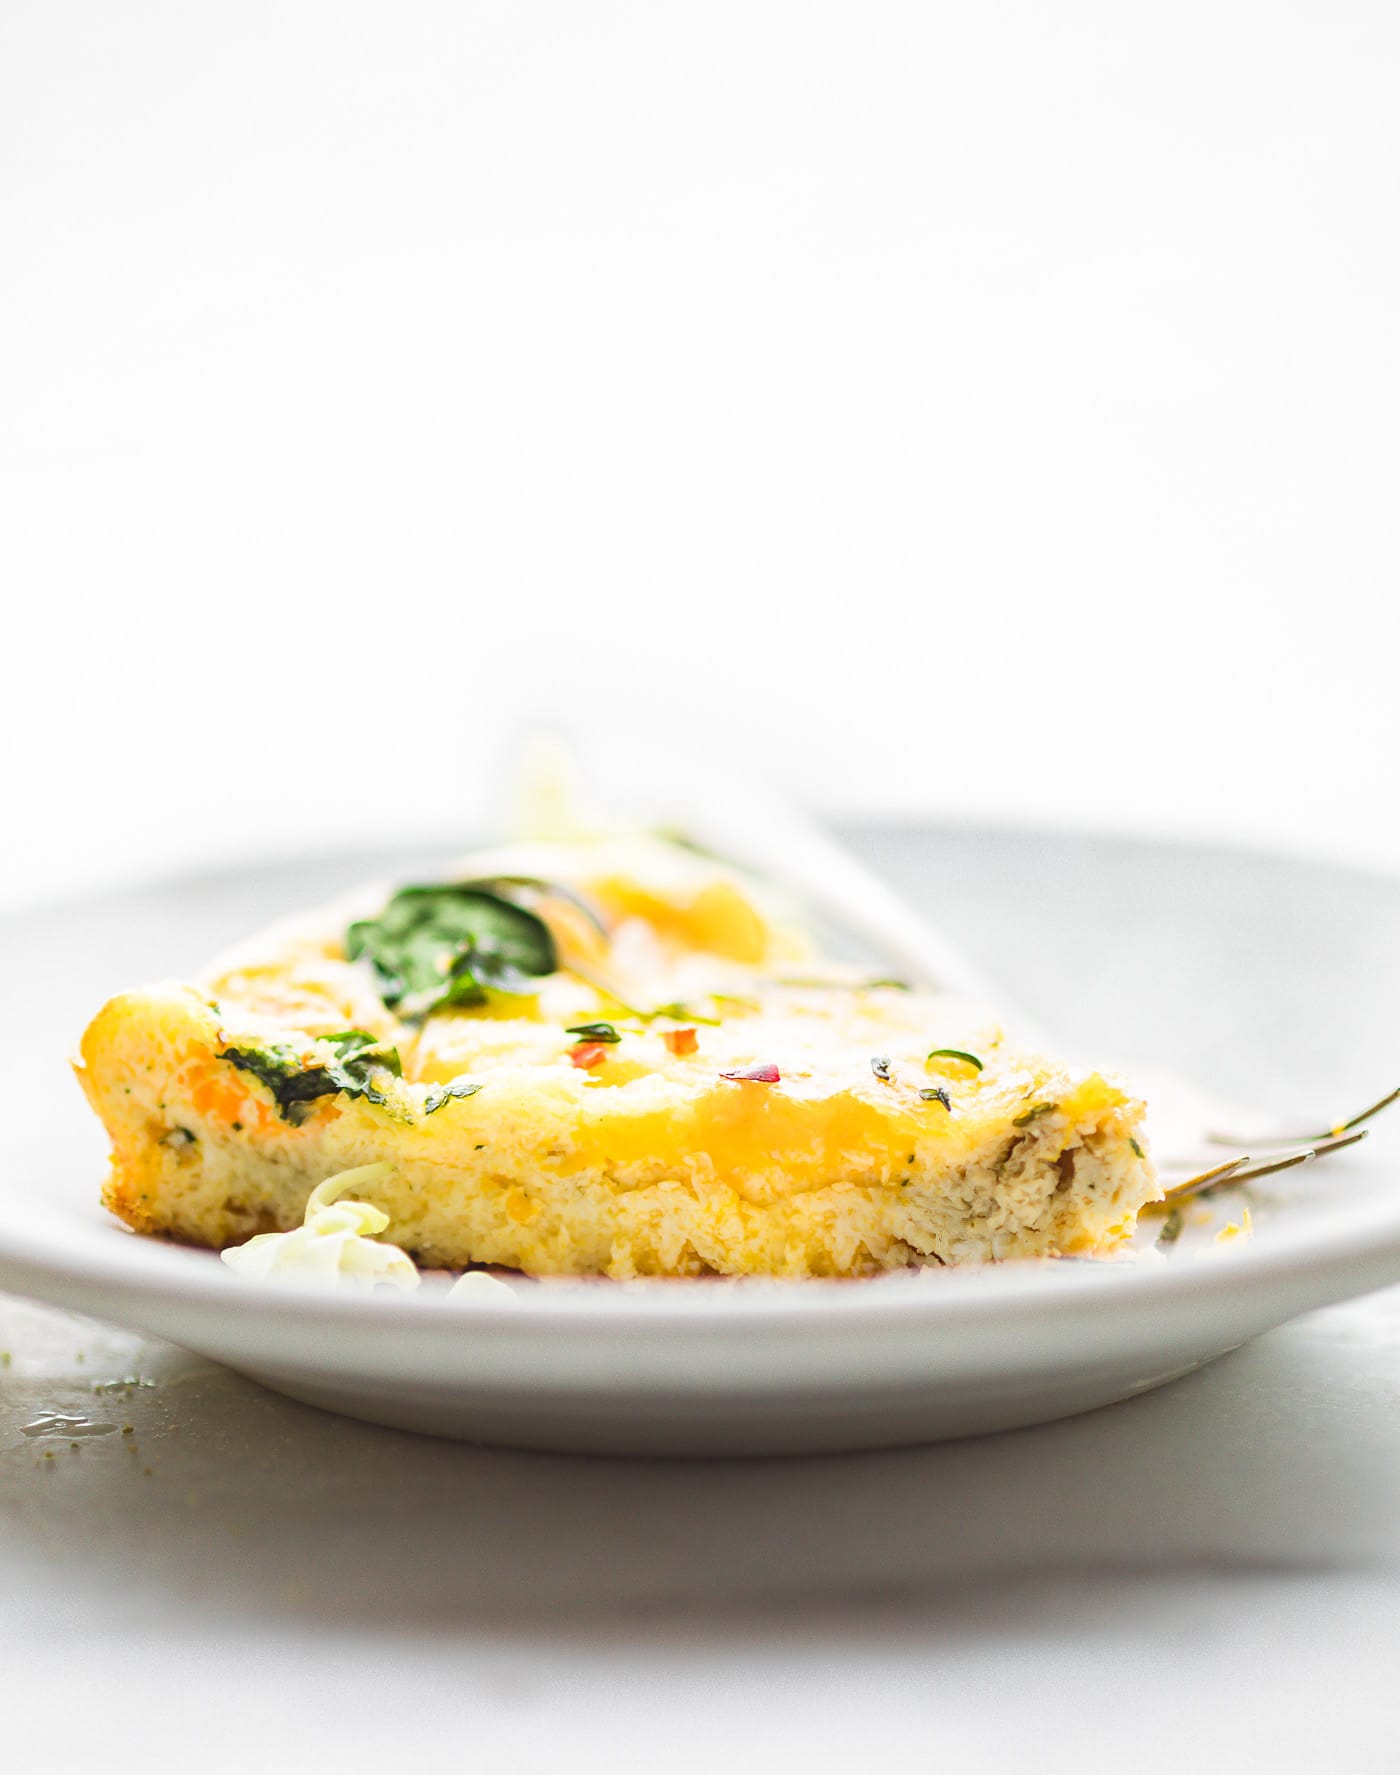 Pumpkin Paleo Frittata with Fried Garlic and Herbs #lowcarb #paleo